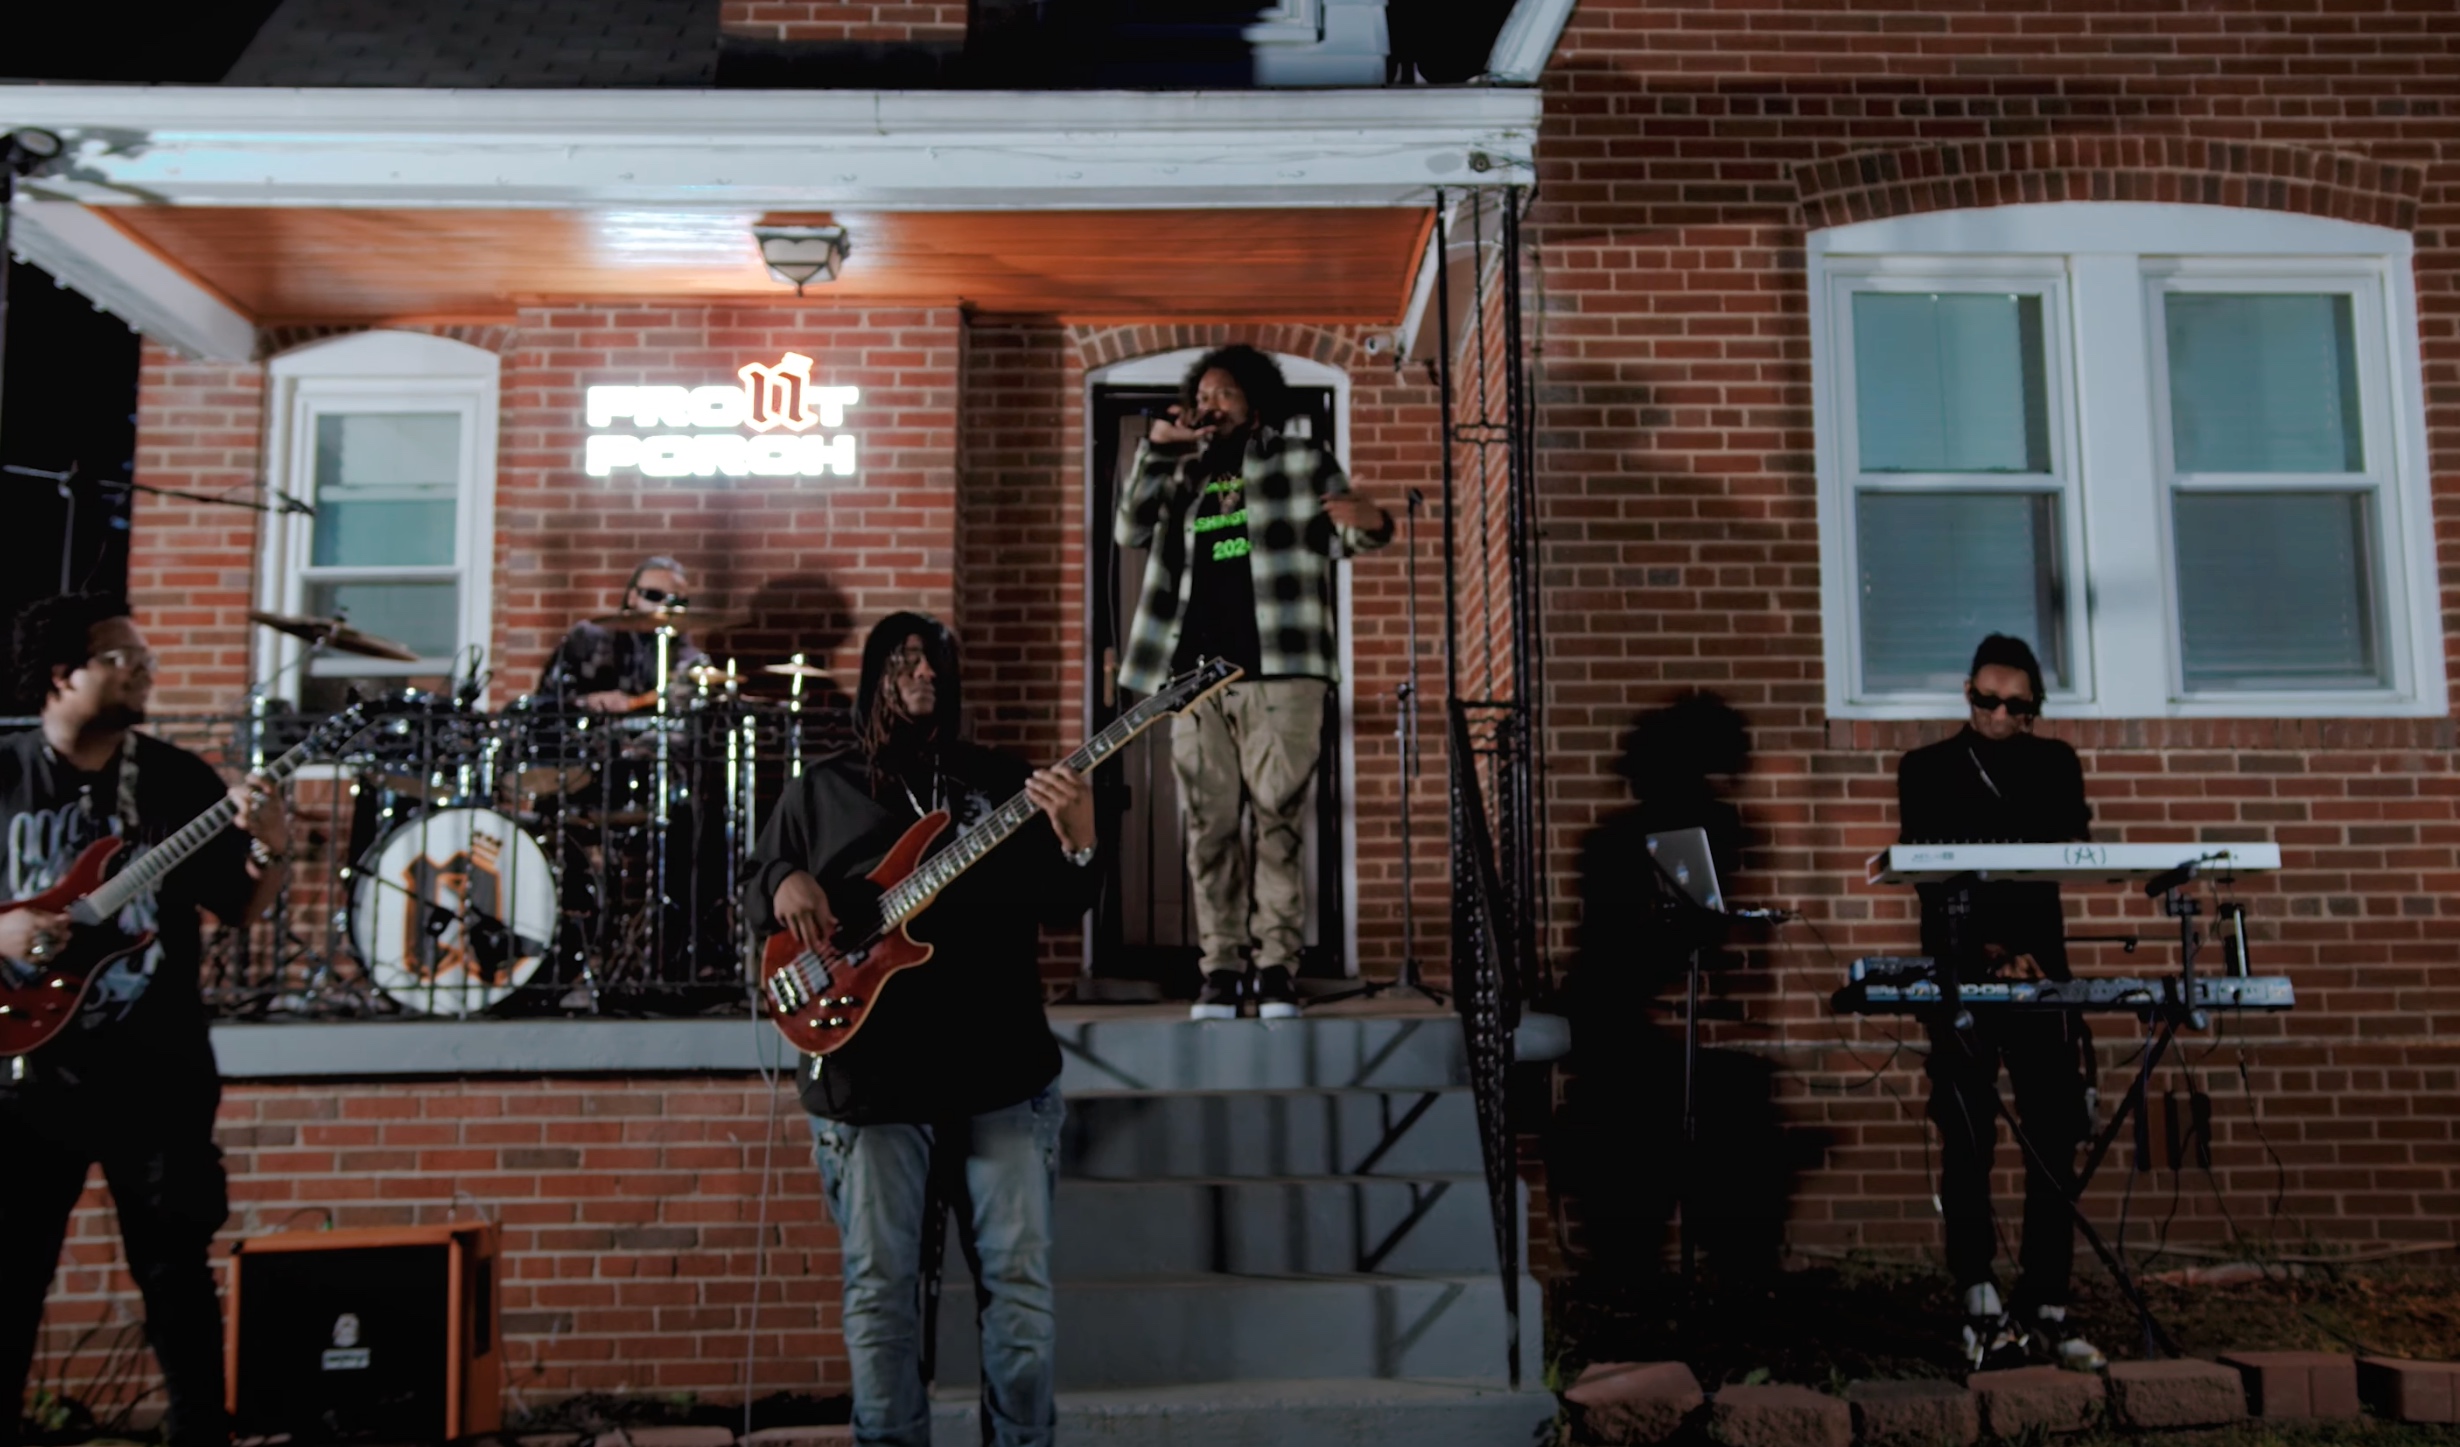 Noochie – “Silver Hill RD” (Front Porch Performance) (Video)